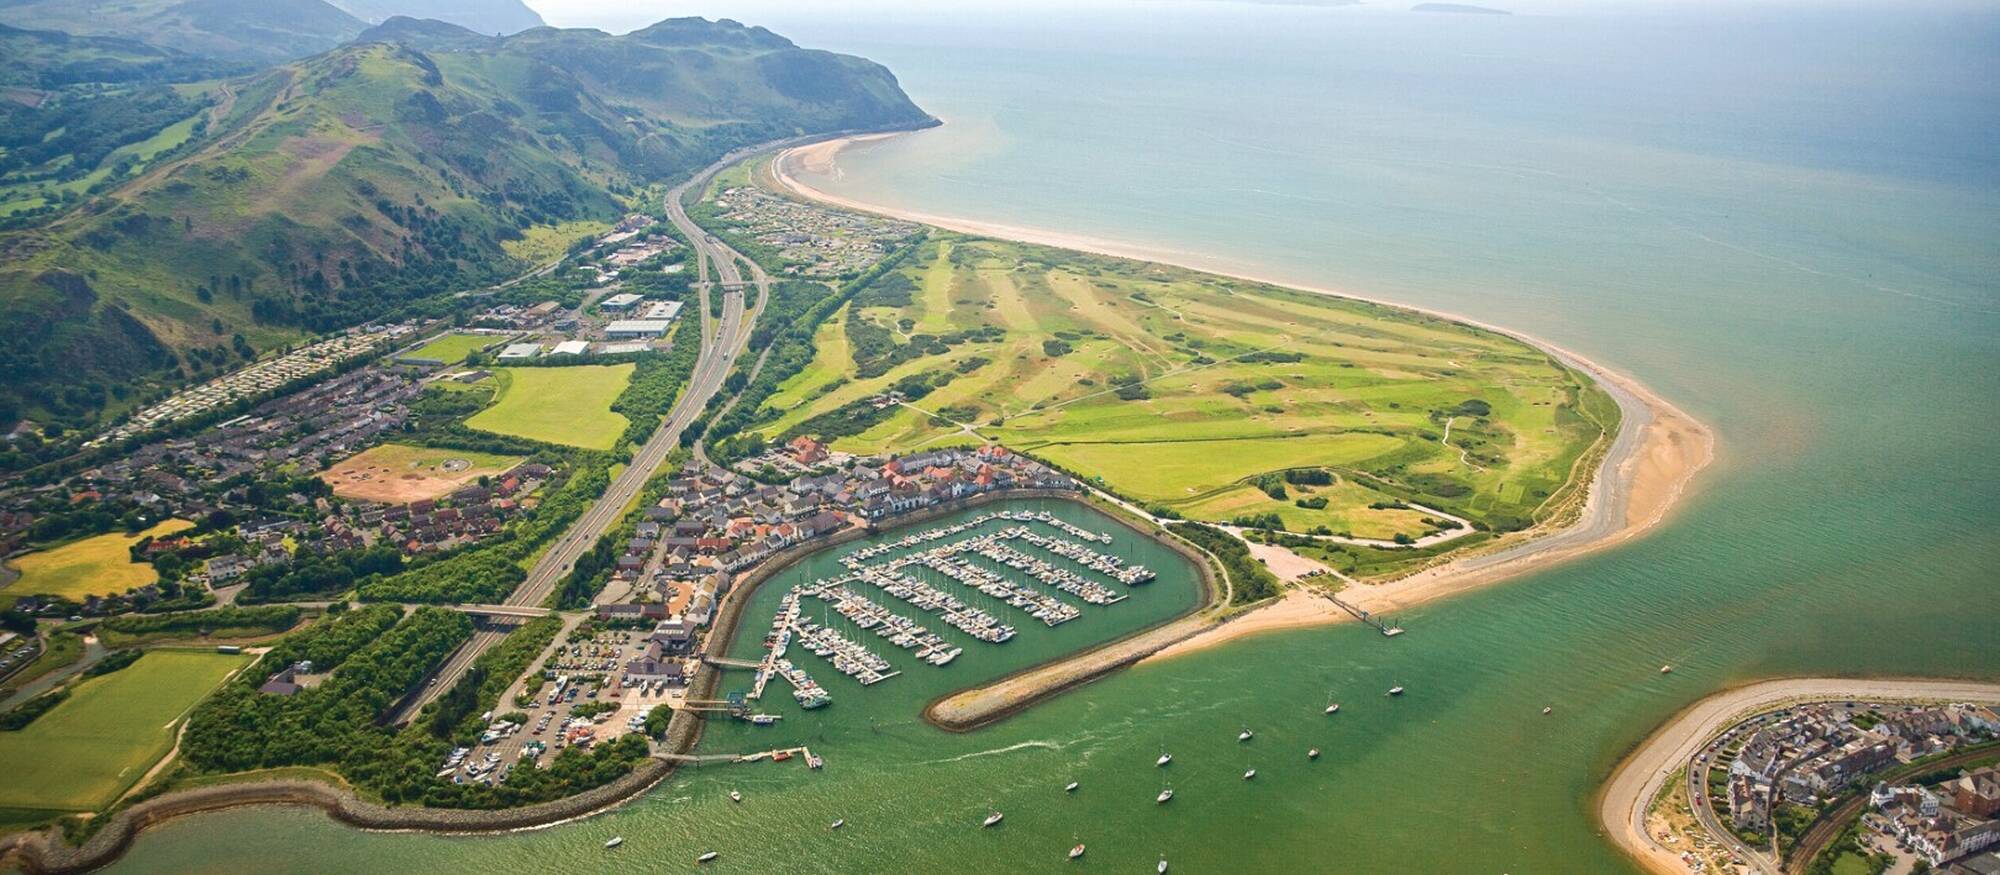 Conwy marina golf course aerial view Large